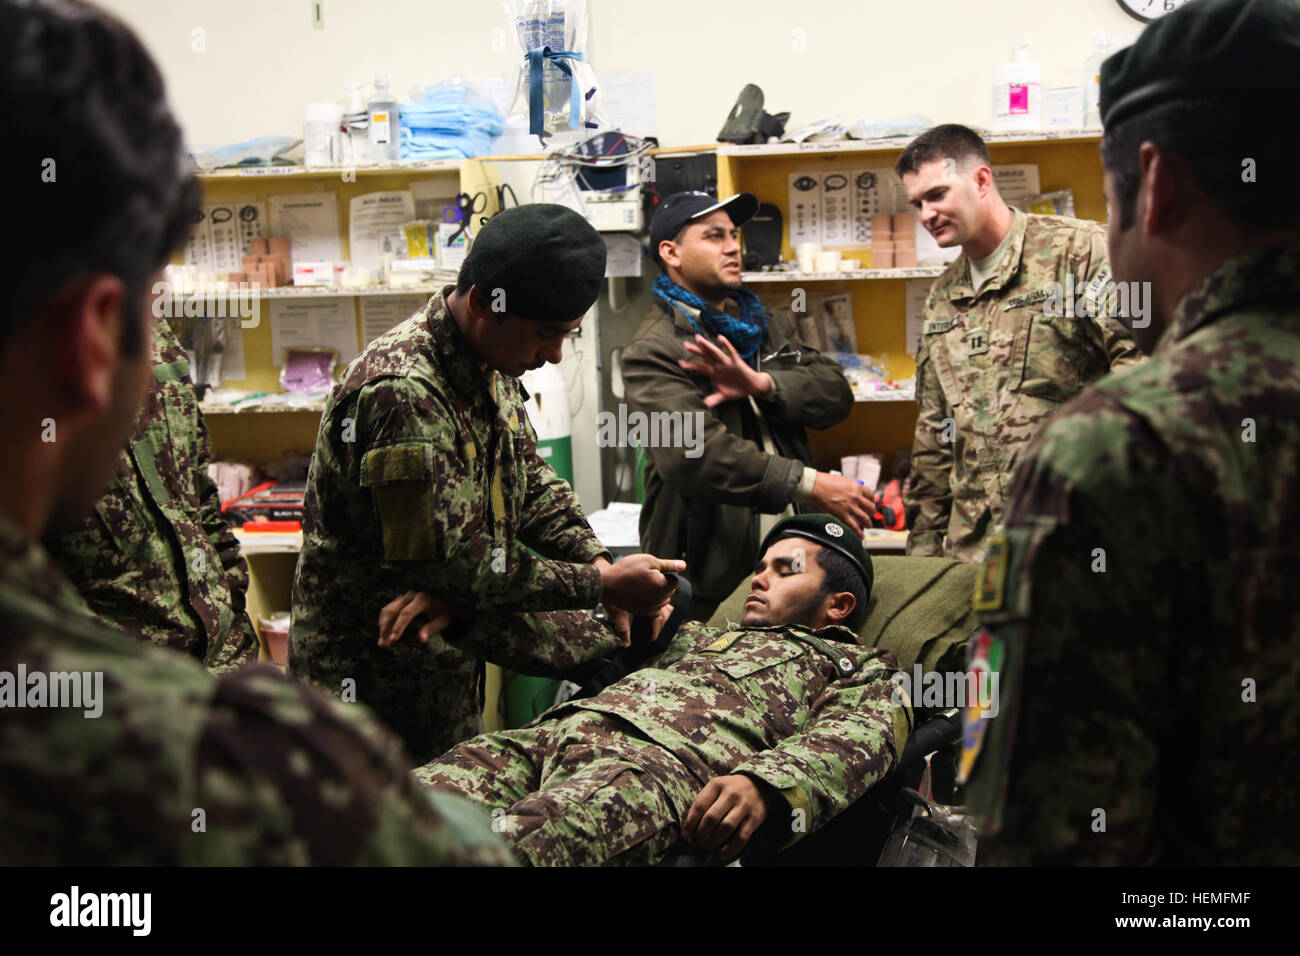 An Afghan National Army soldier assigned to the 2nd Brigade, 201st Corps teaches fellow combat medics how to apply a tourniquet to an upper extremity during ANA medical training at Forward Operating Base Joyce, Kunar province, Afghanistan, March 18, 2013. Medical training is held for ANA combat medics so they can teach combat lifesaver courses more efficiently to ANA soldiers. (U.S. Army photo by Spc. Ryan Hallgarth/Released) ANA medical training at FOB Joyce 130318-A-BX842-010 Stock Photo